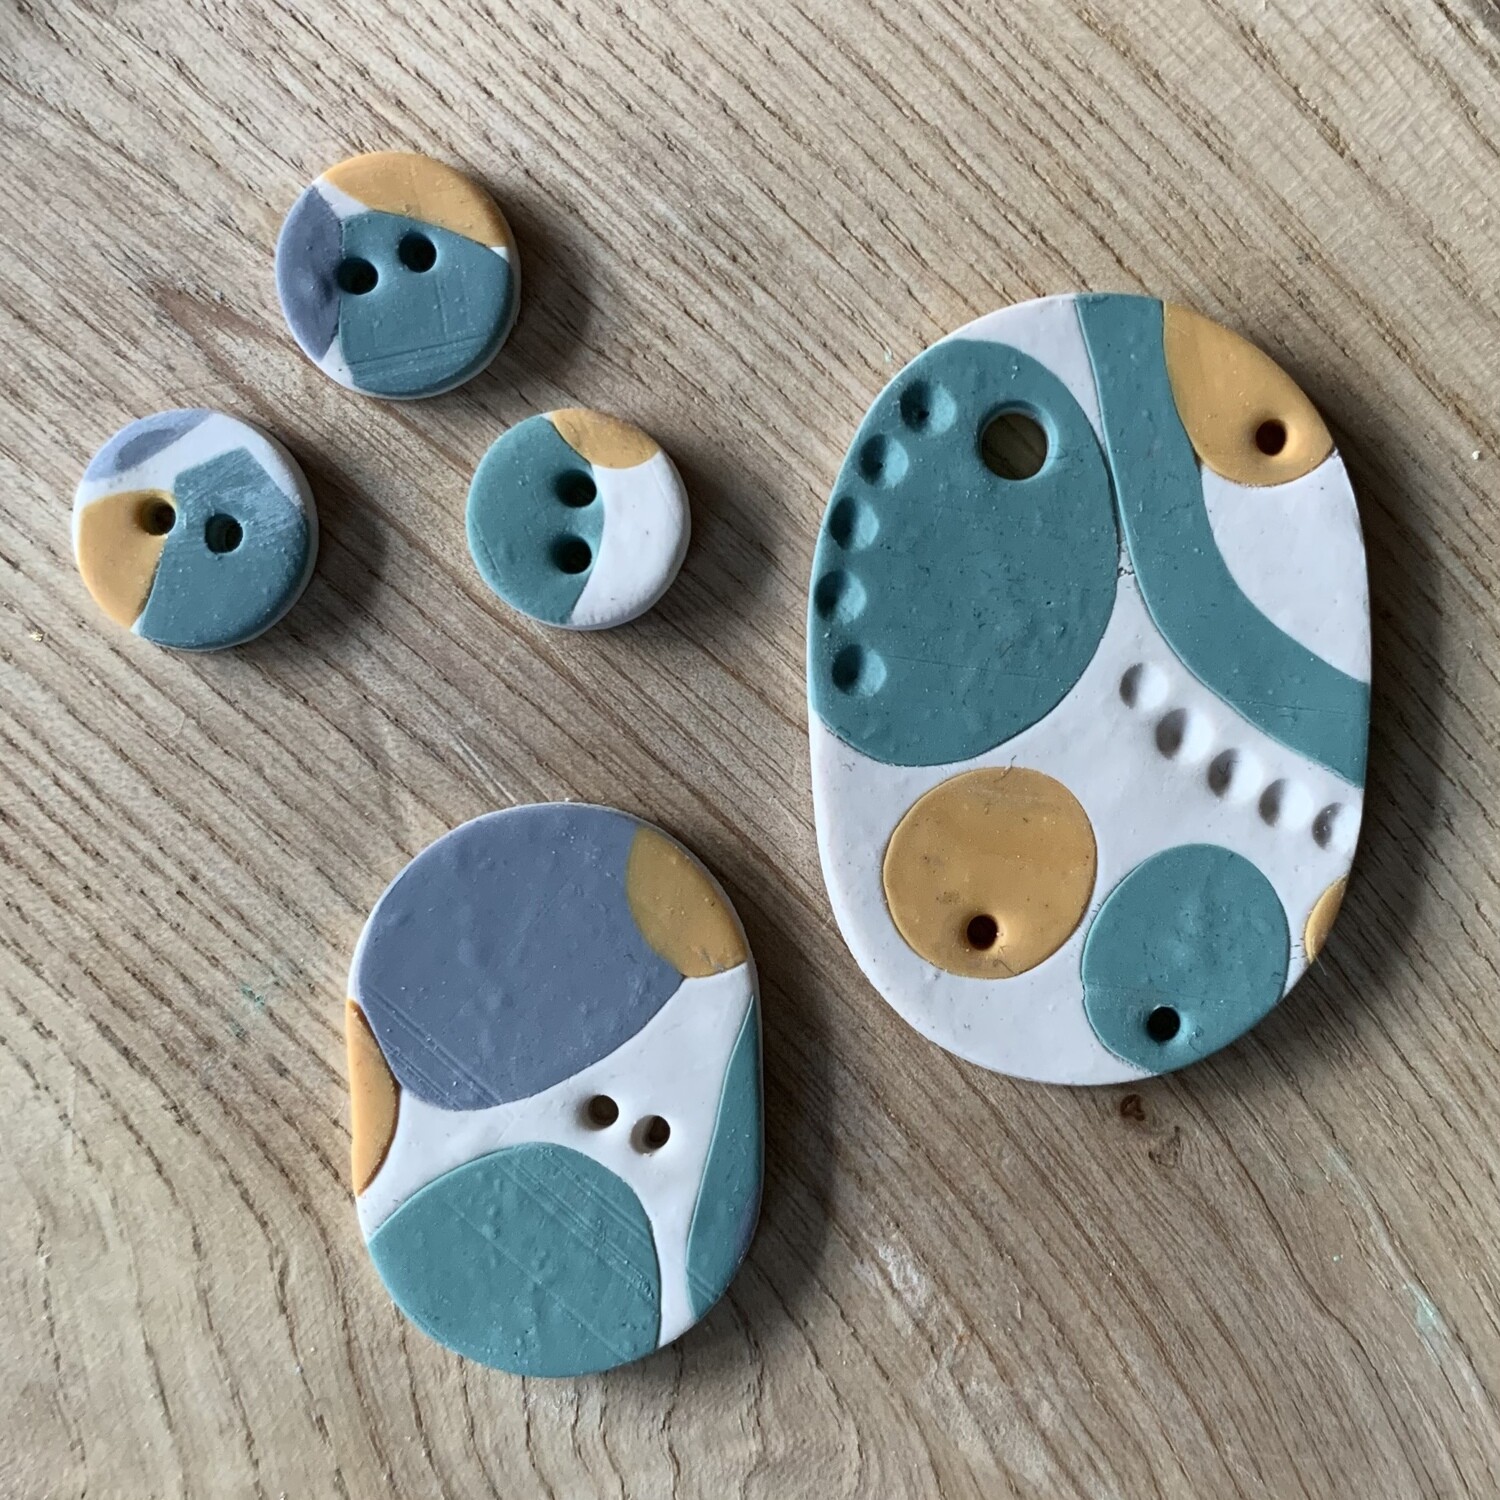 Beginner Polymer Clay Jewellery - 3 Hours - One to One